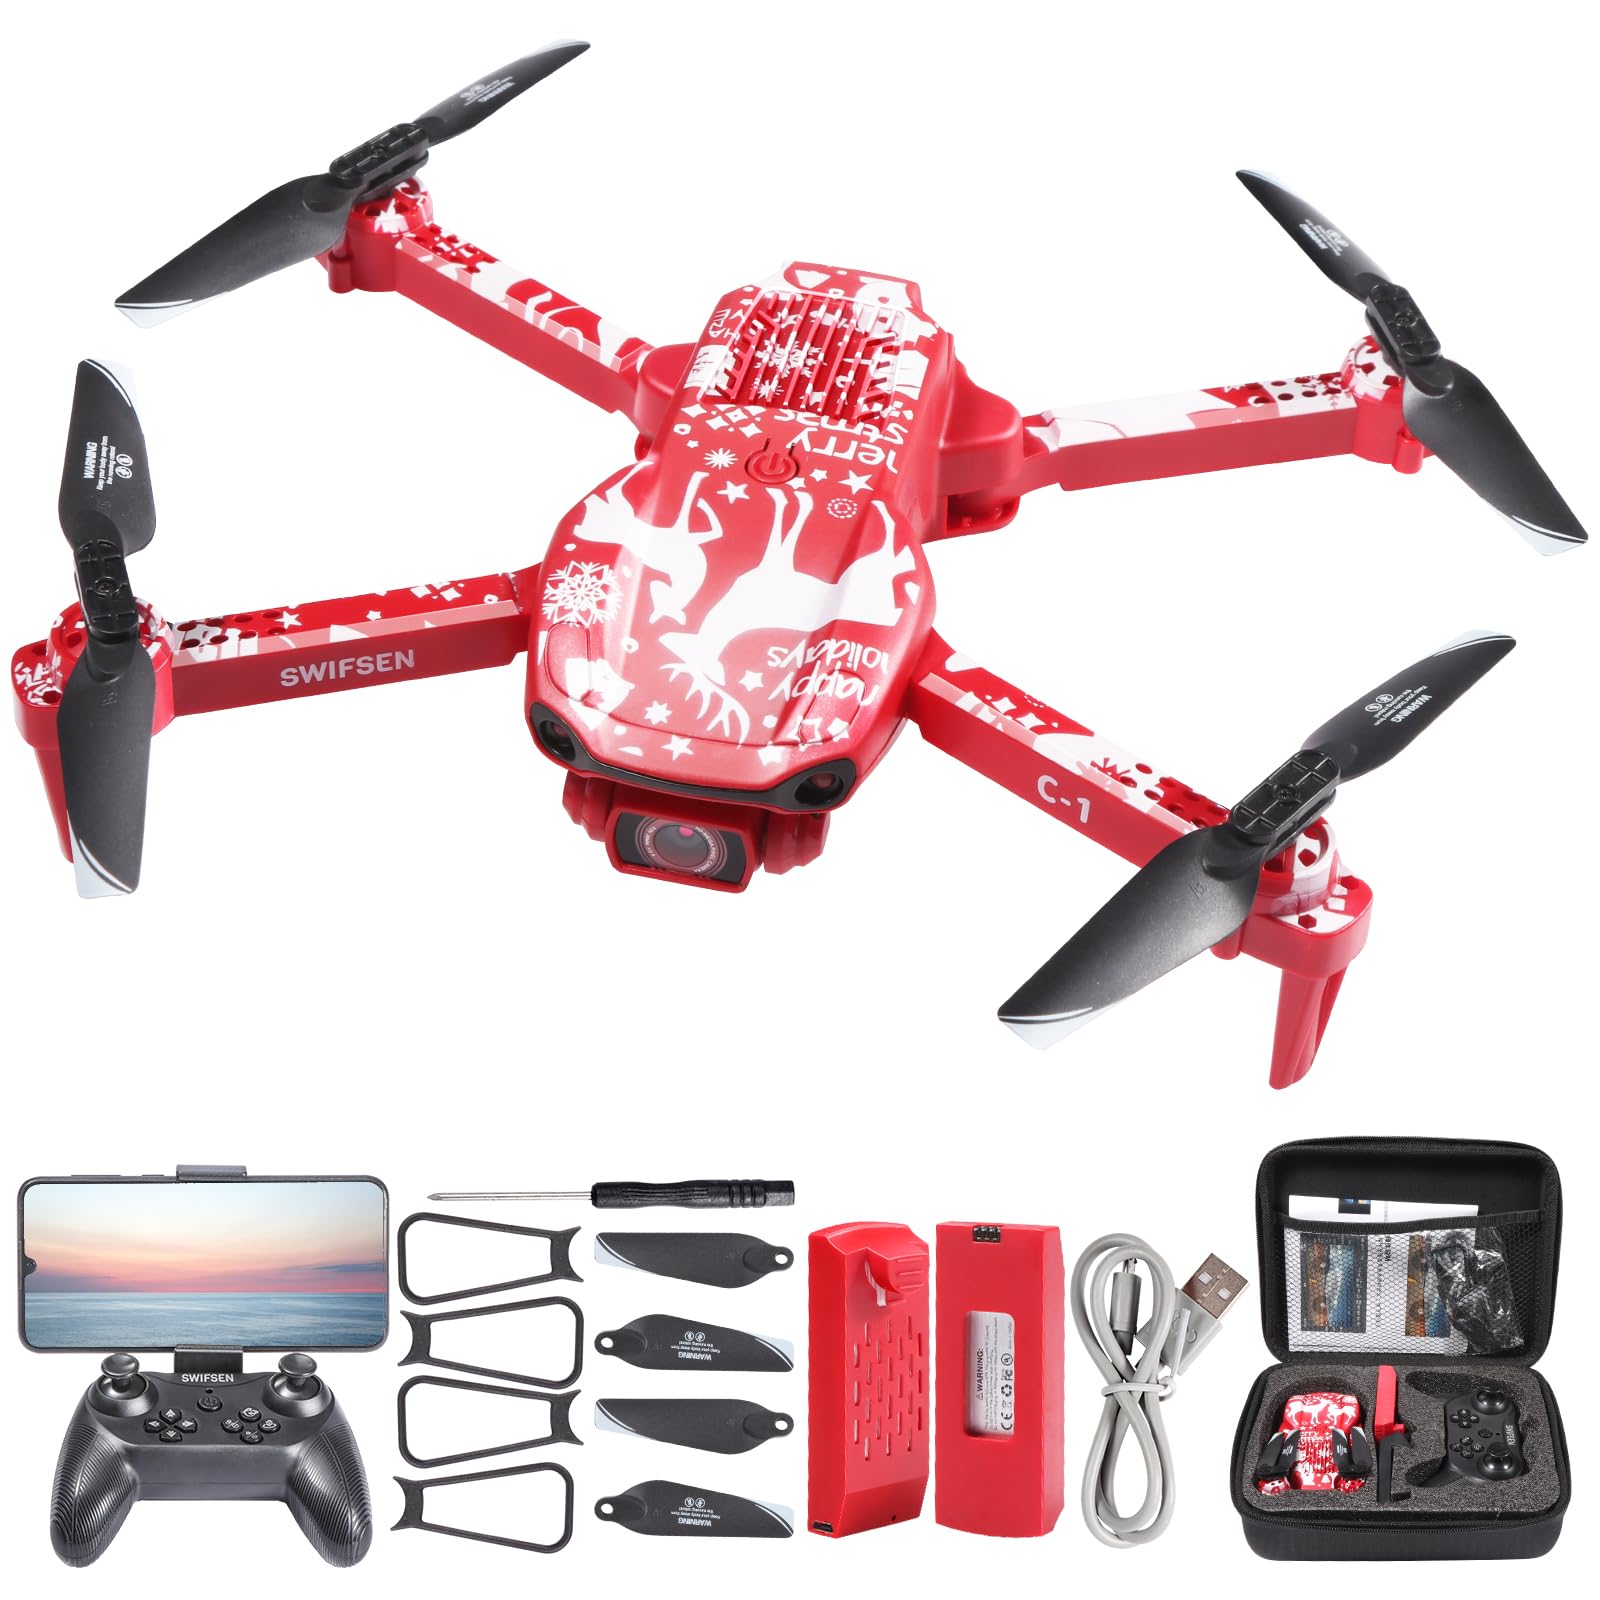 Swifsen Mini Drone with camera， Auto return,1080P HD FPV Camera Remote Control Toys, Altitude Hold, One Key Take Off/Land, 45° Adjustable Lens, 2 Batteries, Christmas Gifts for Kids, Adults, beginner